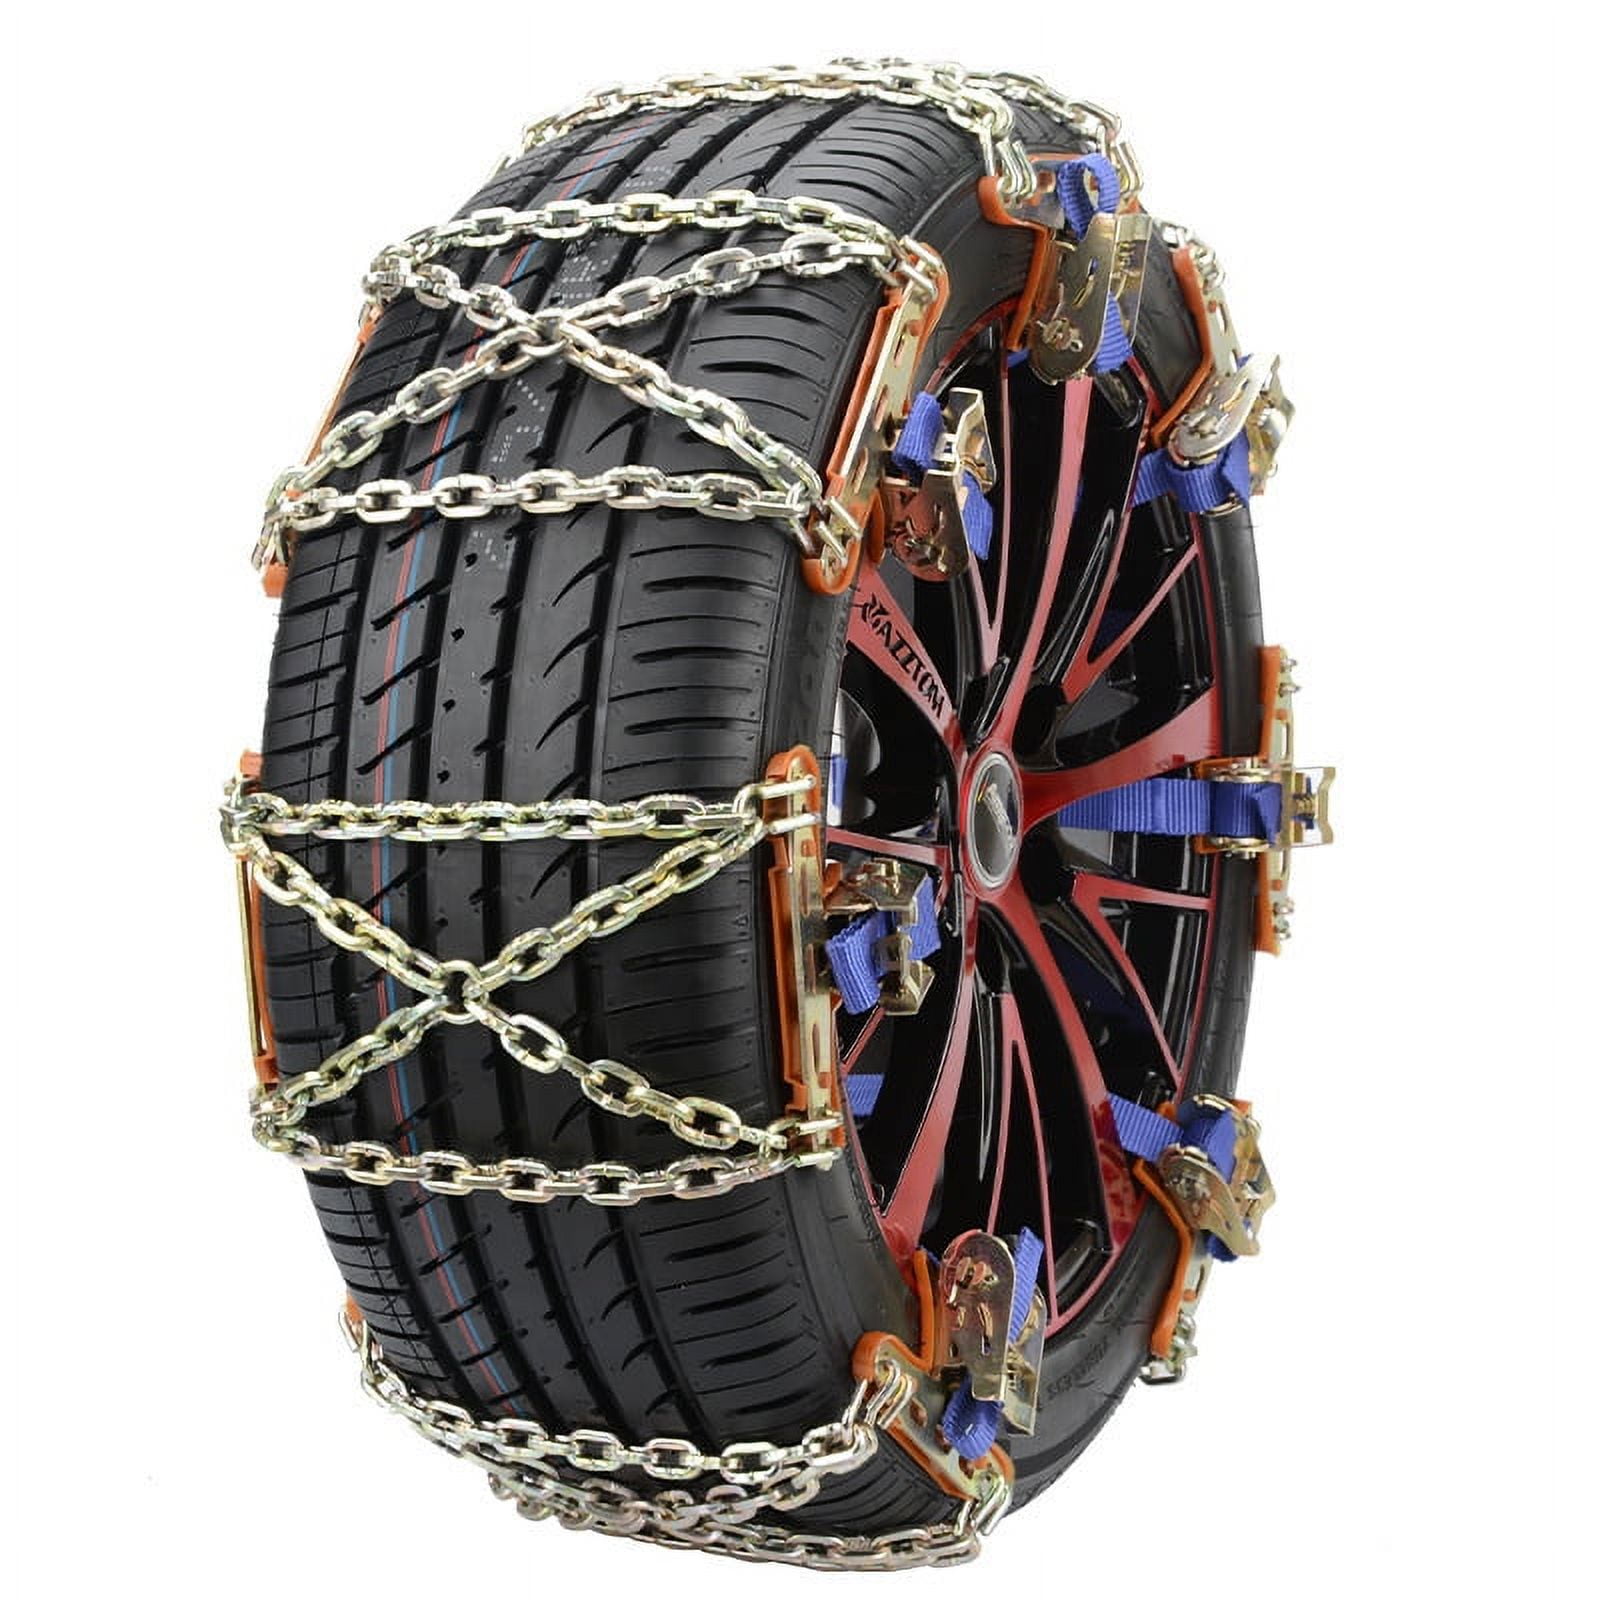 GOHHME Car Tire Snow Chains, 8 Pieces New Universal Fit Anti-slip Car  Chains Set Stainless Steel Anti-skid Emergency Snow Tyre Chains Adjustable  Tire